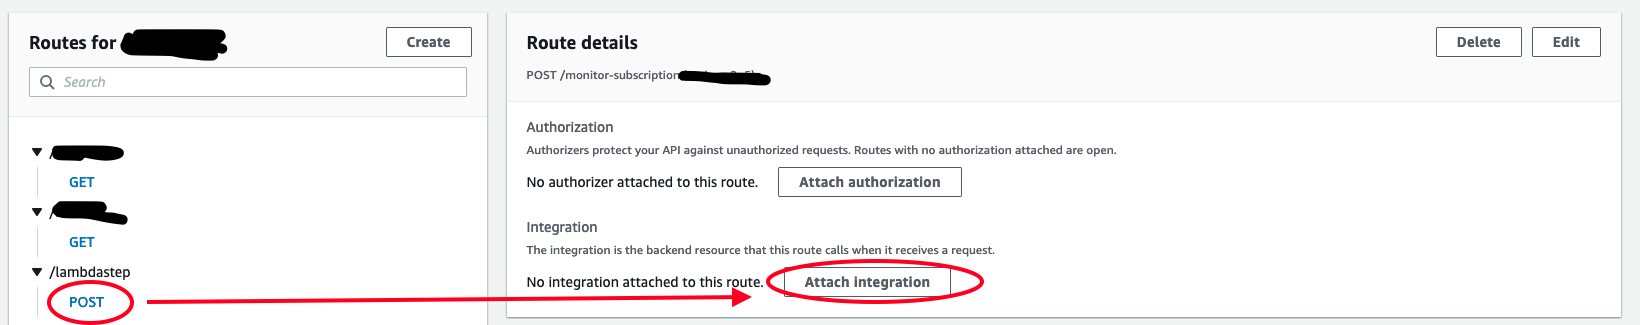 10 - Attach a new integration for a route on API Gateway